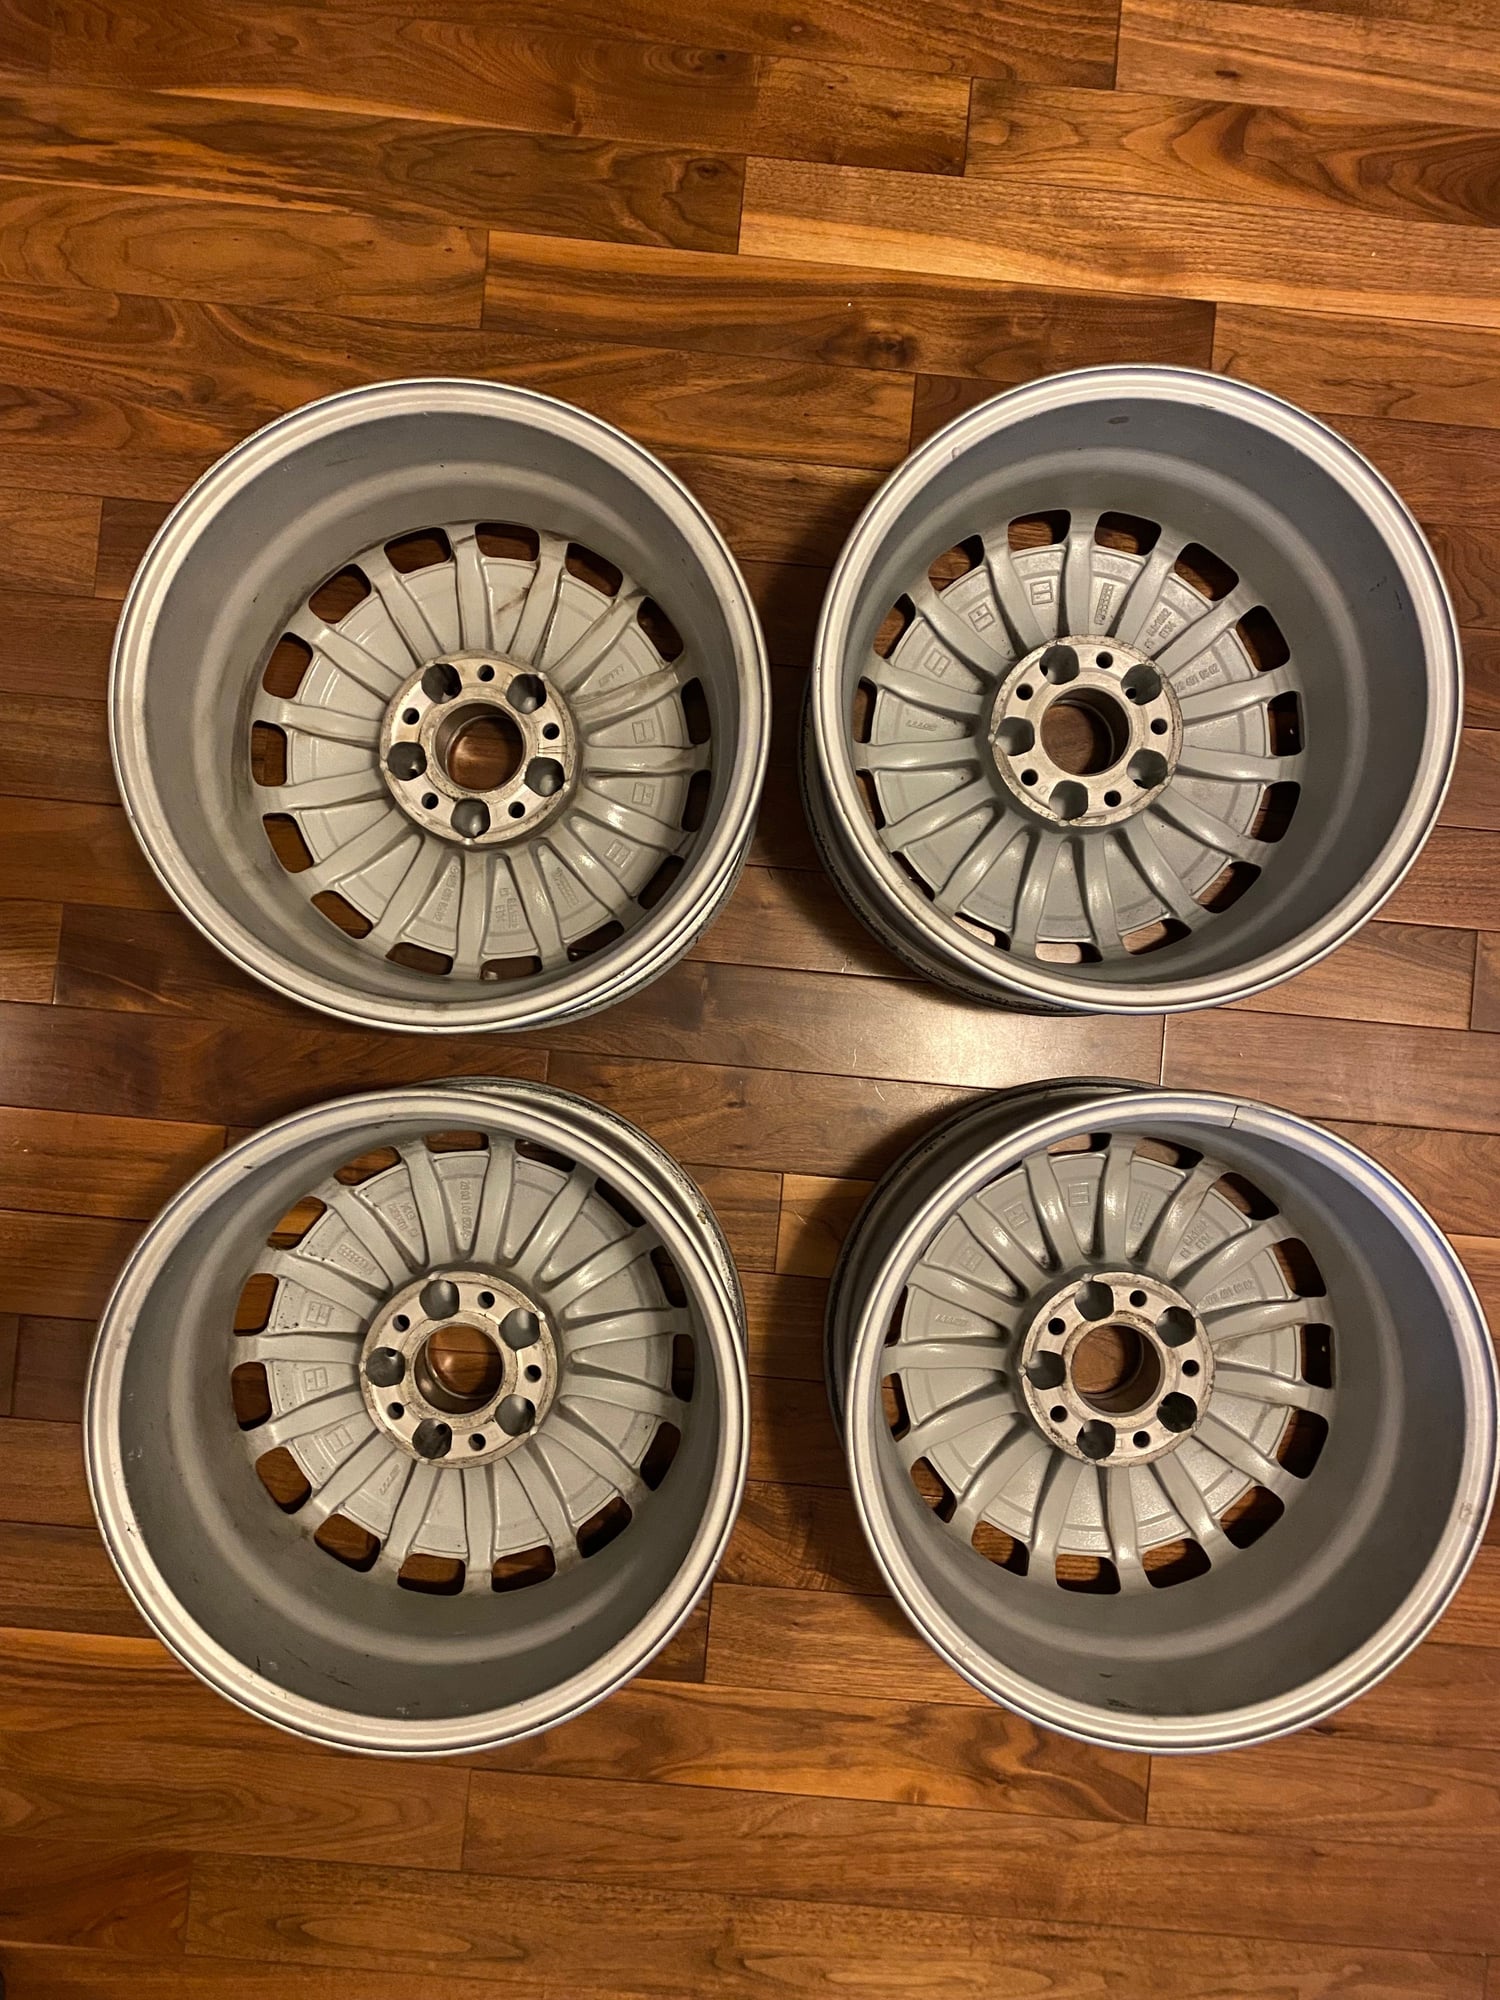 Wheels and Tires/Axles - A set of four (4) rims - Used - 1989 to 2001 Mercedes-Benz 500SL - Calgary, AB T3H5Z1, Canada